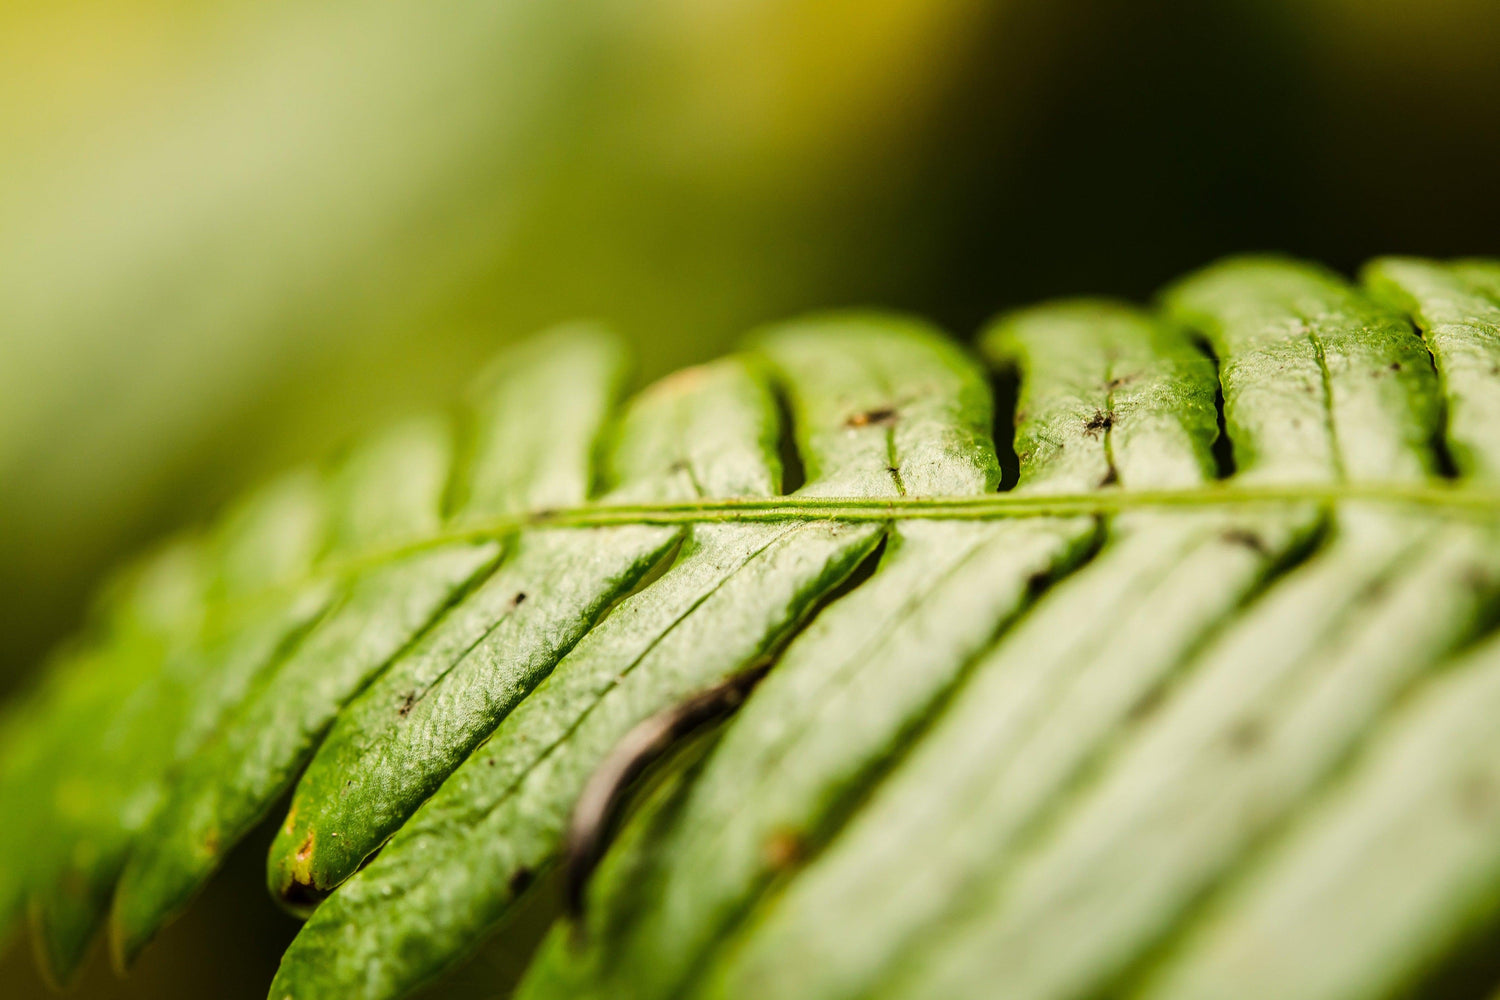 Fine photography print of a close up lusciously green fern growing in Olympic National Park.